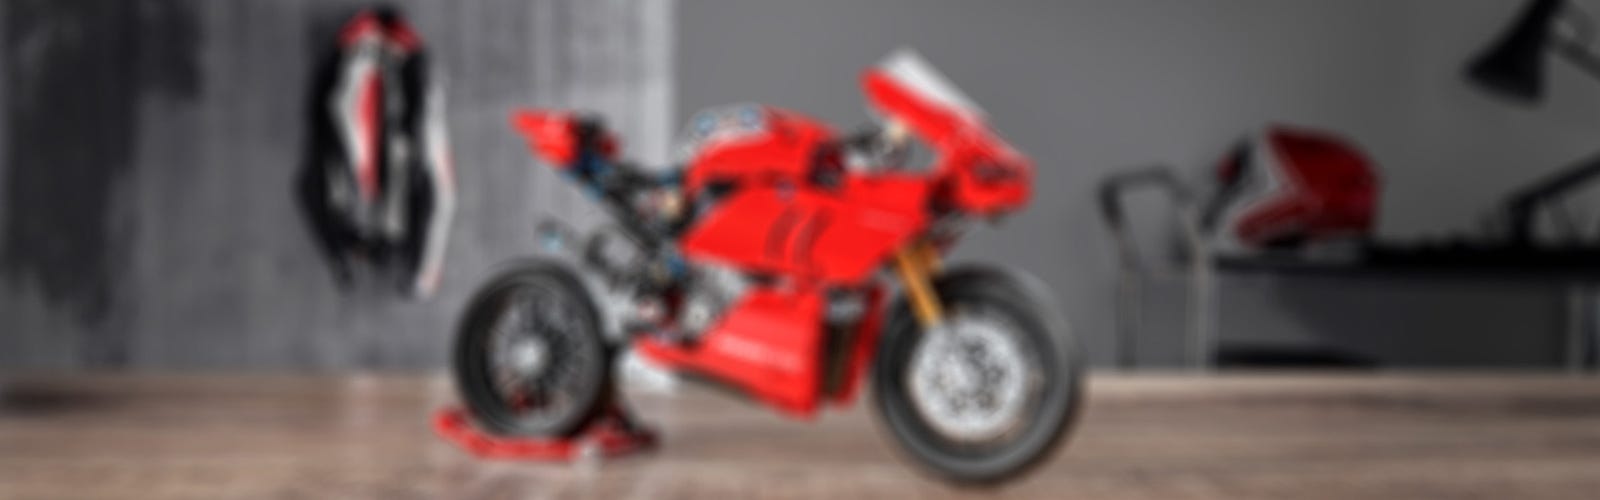 30 years of Technic motorcycles